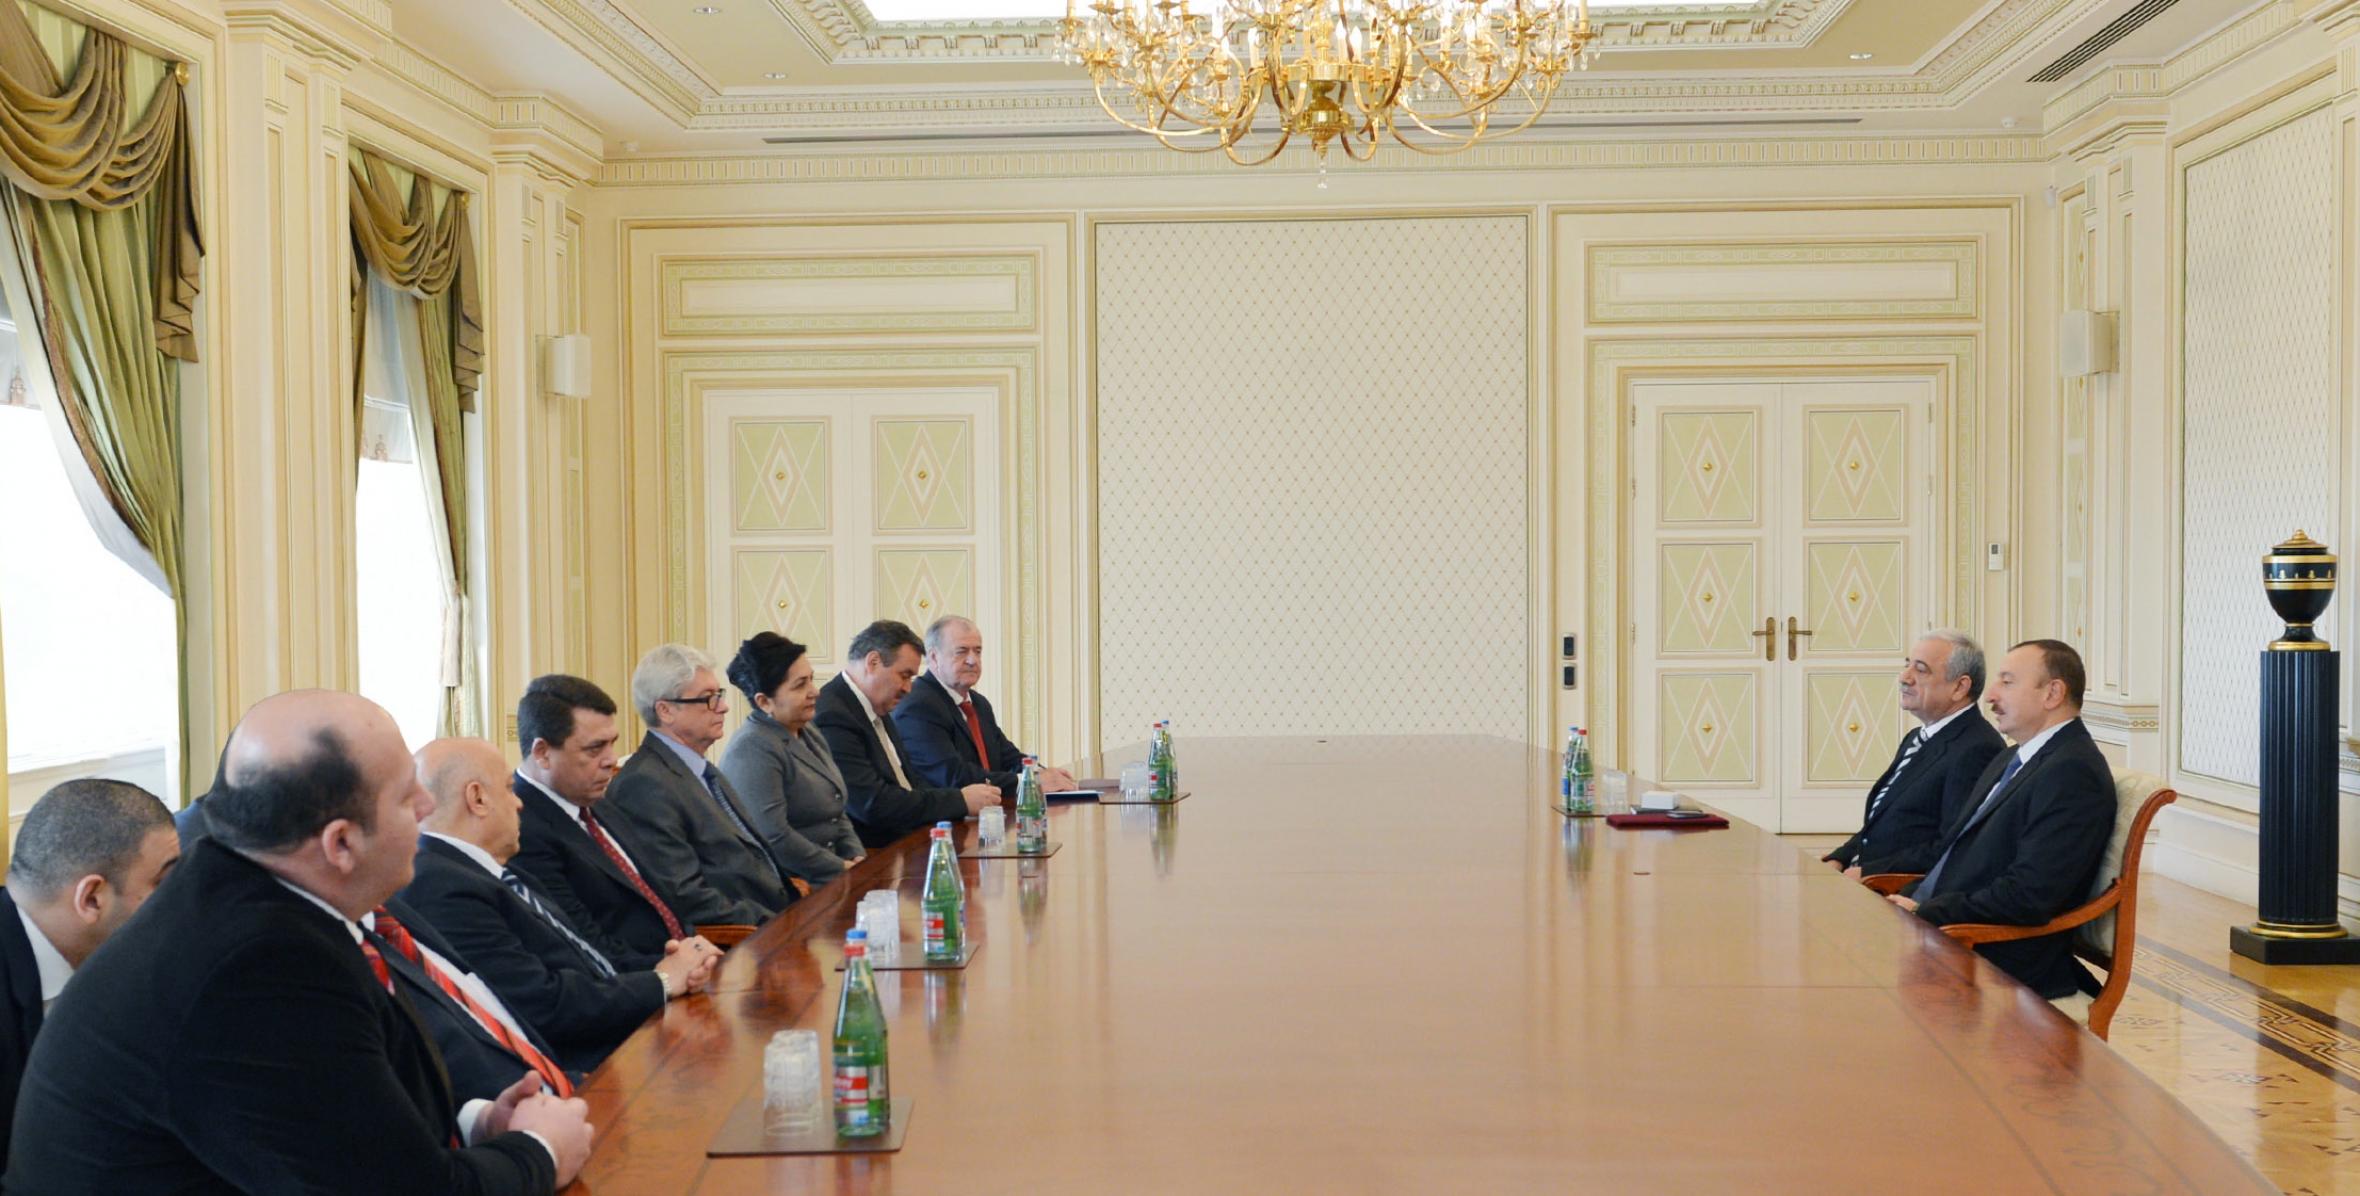 Ilham Aliyev received heads of delegations of foreign countries attending the Fourth Congress of the Confederation of Trade Unions of Azerbaijan